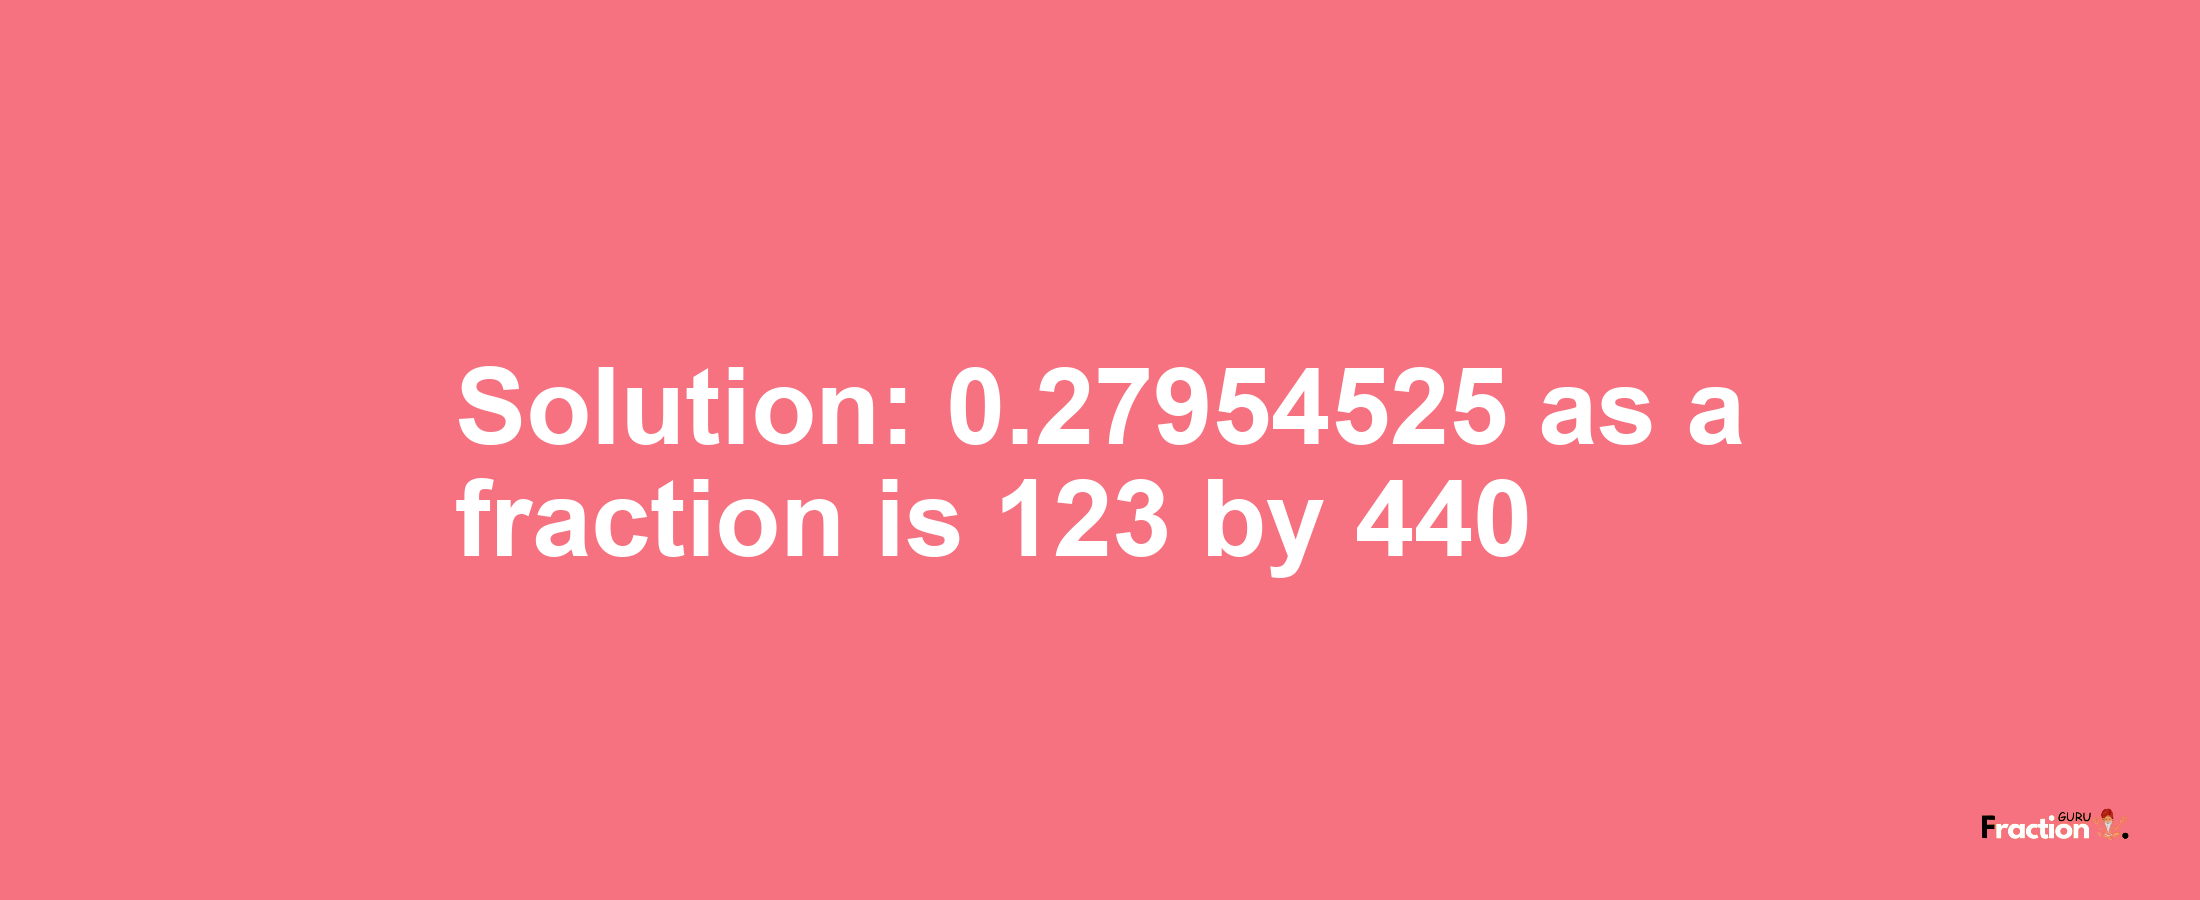 Solution:0.27954525 as a fraction is 123/440